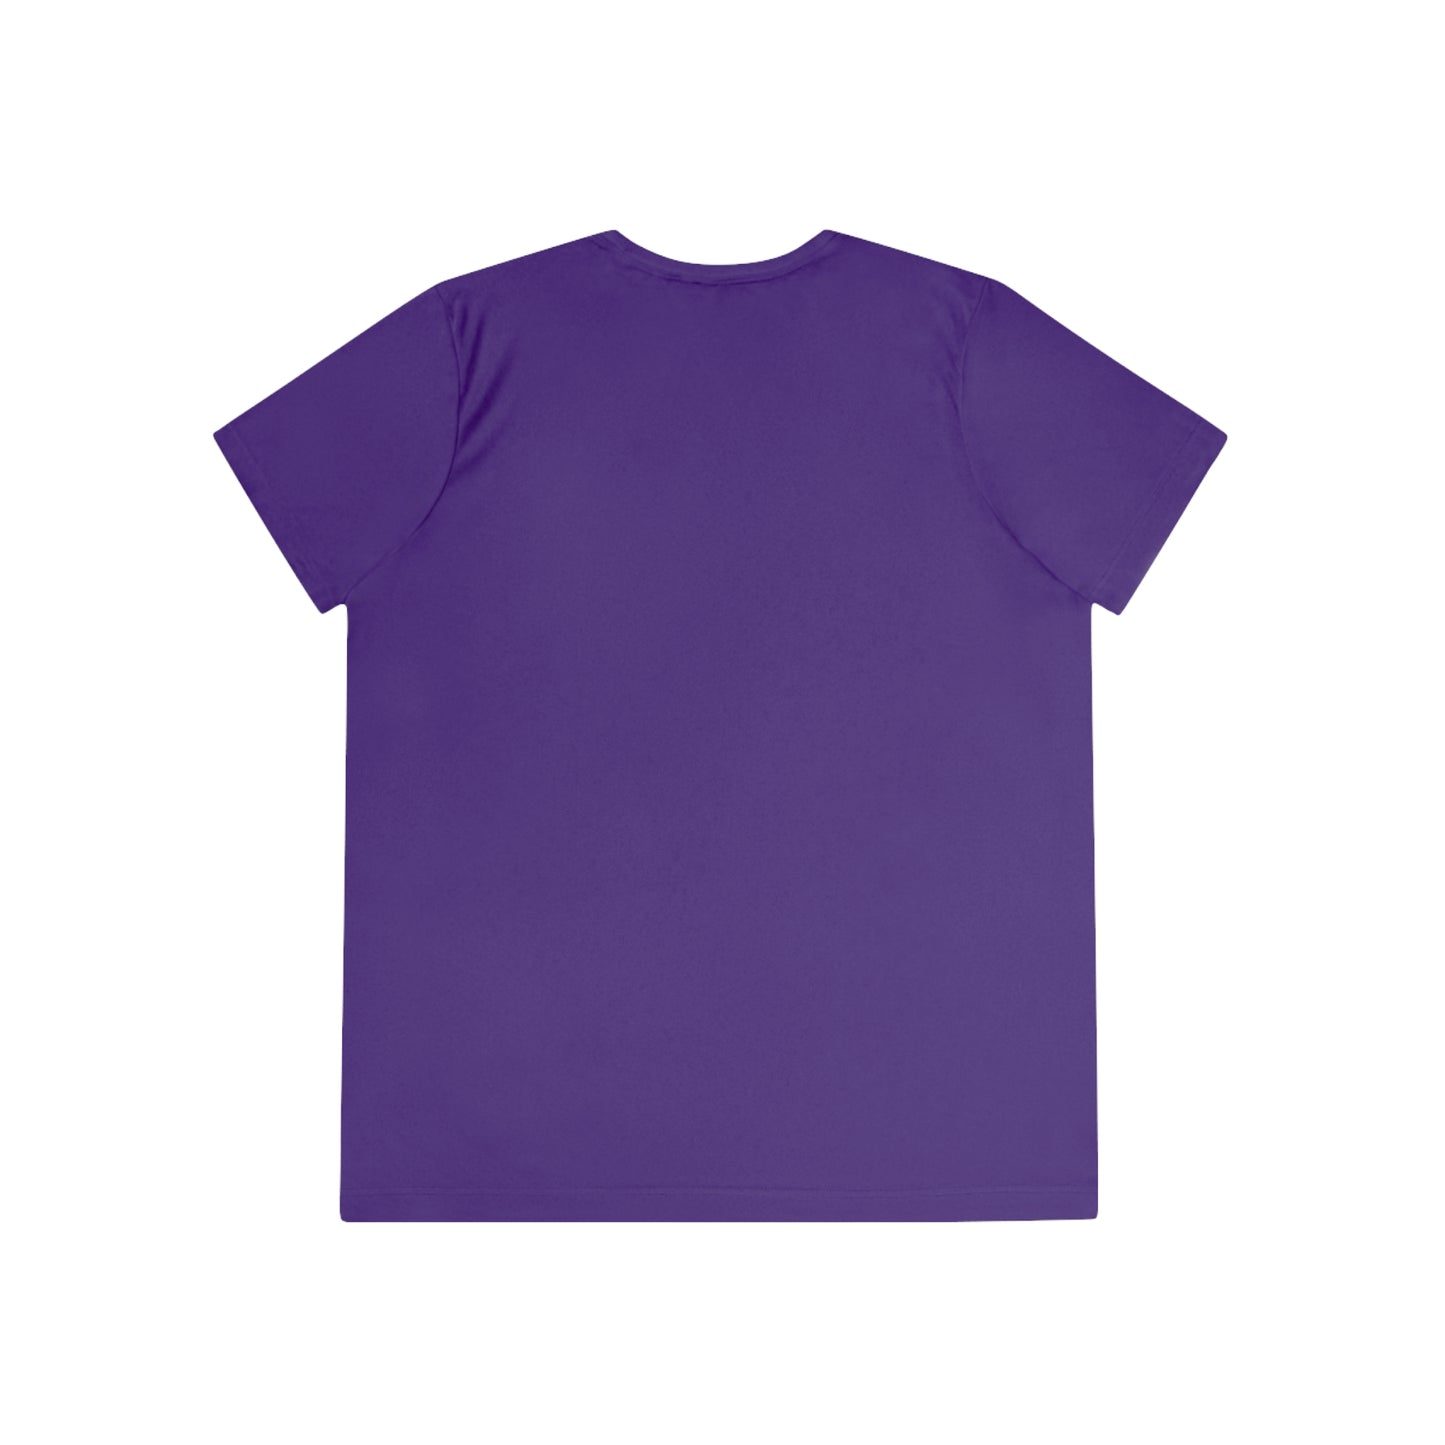 Flat back view of the purple shirt